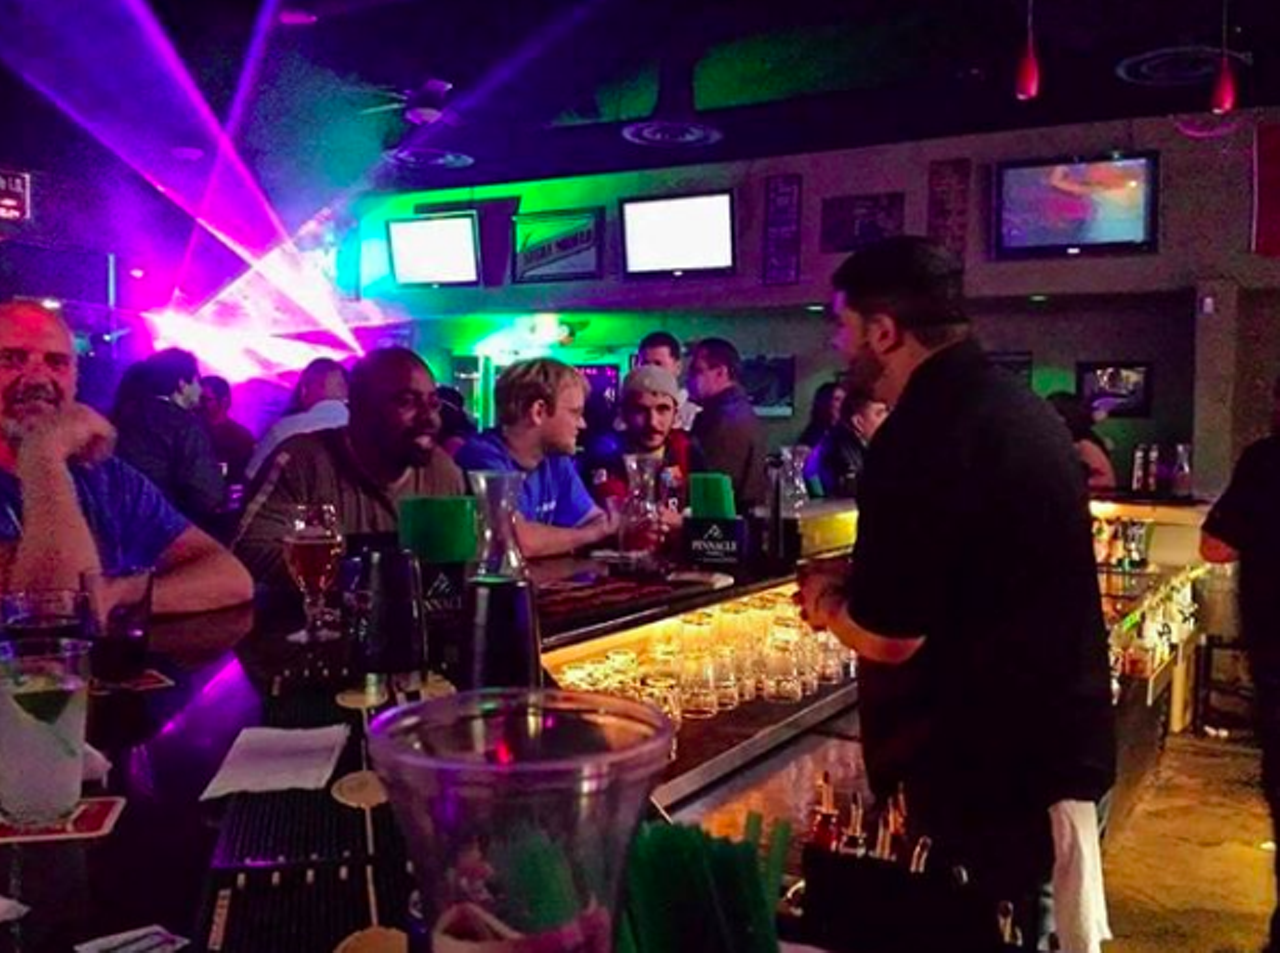 Shenanygans
Multiple locations, facebook.com
With two outposts in SA, Shenanygans lets you feel welcome with the sports bar attitude (and cool patios!) and cocktail menu. Don’t worry – they have specials all the time. Trust us, you’ll feel like family and become a regular in no time.
Photo via Instagram / sacurrent